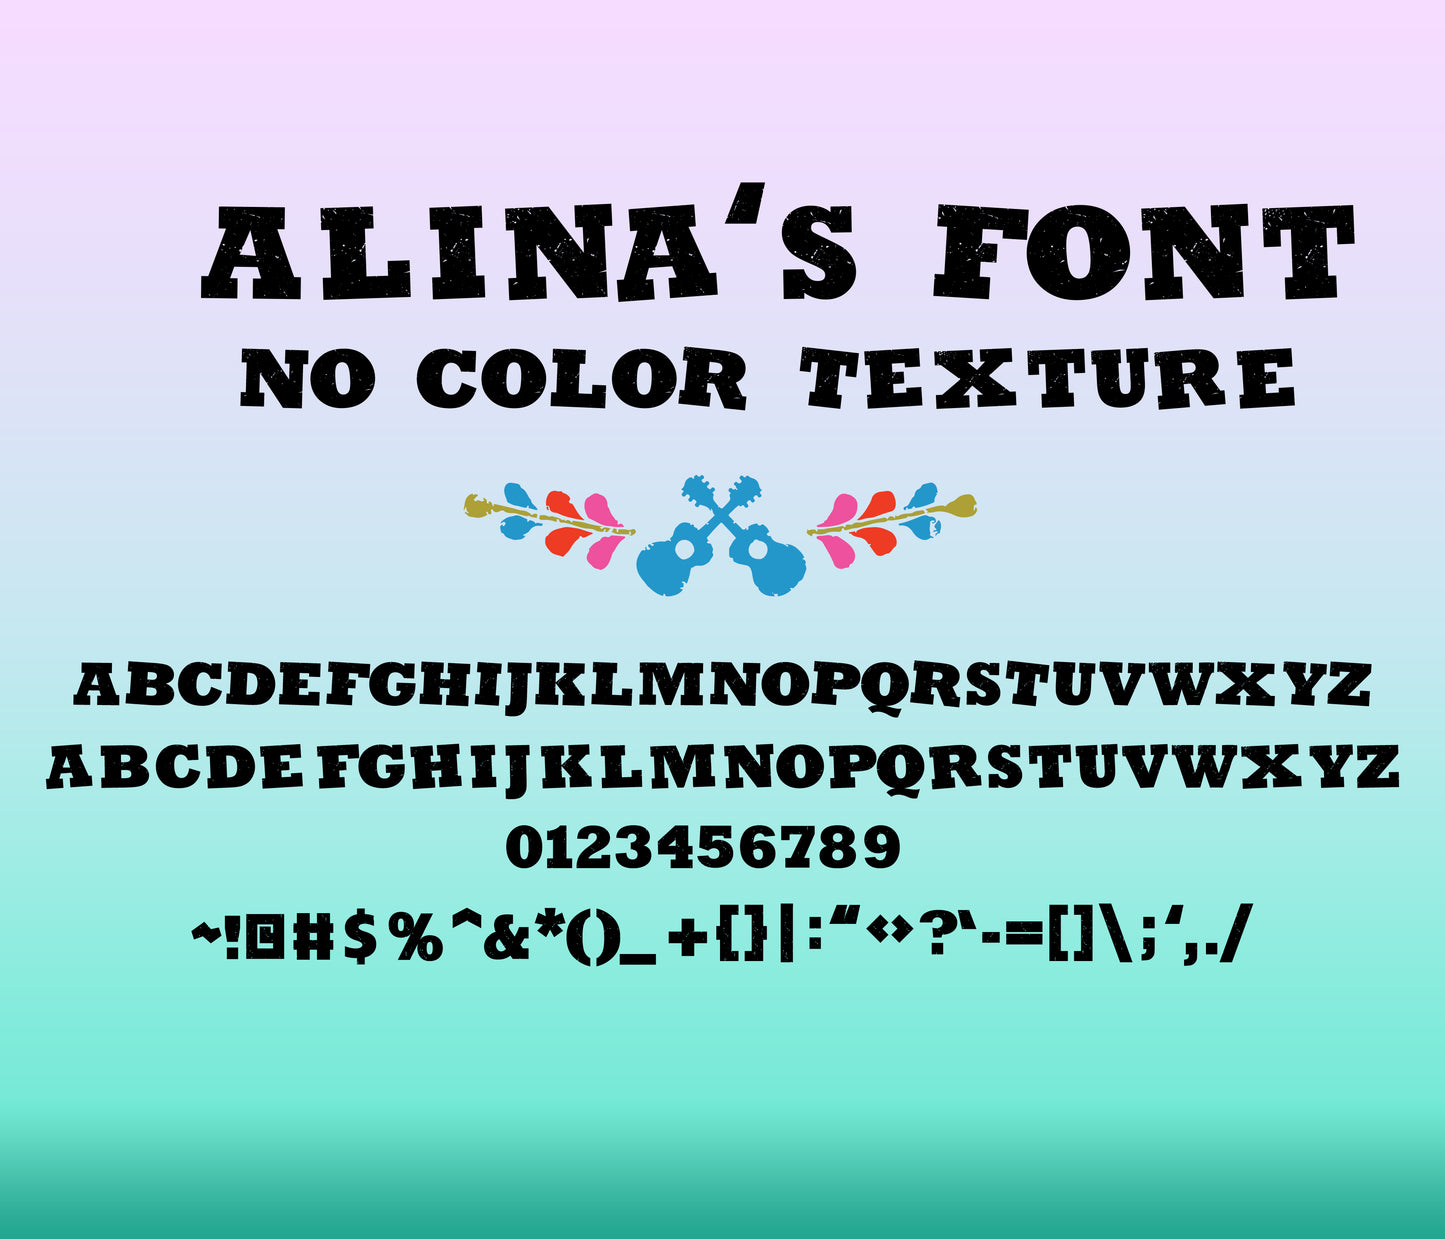 Coco Colored Textured Font Flick